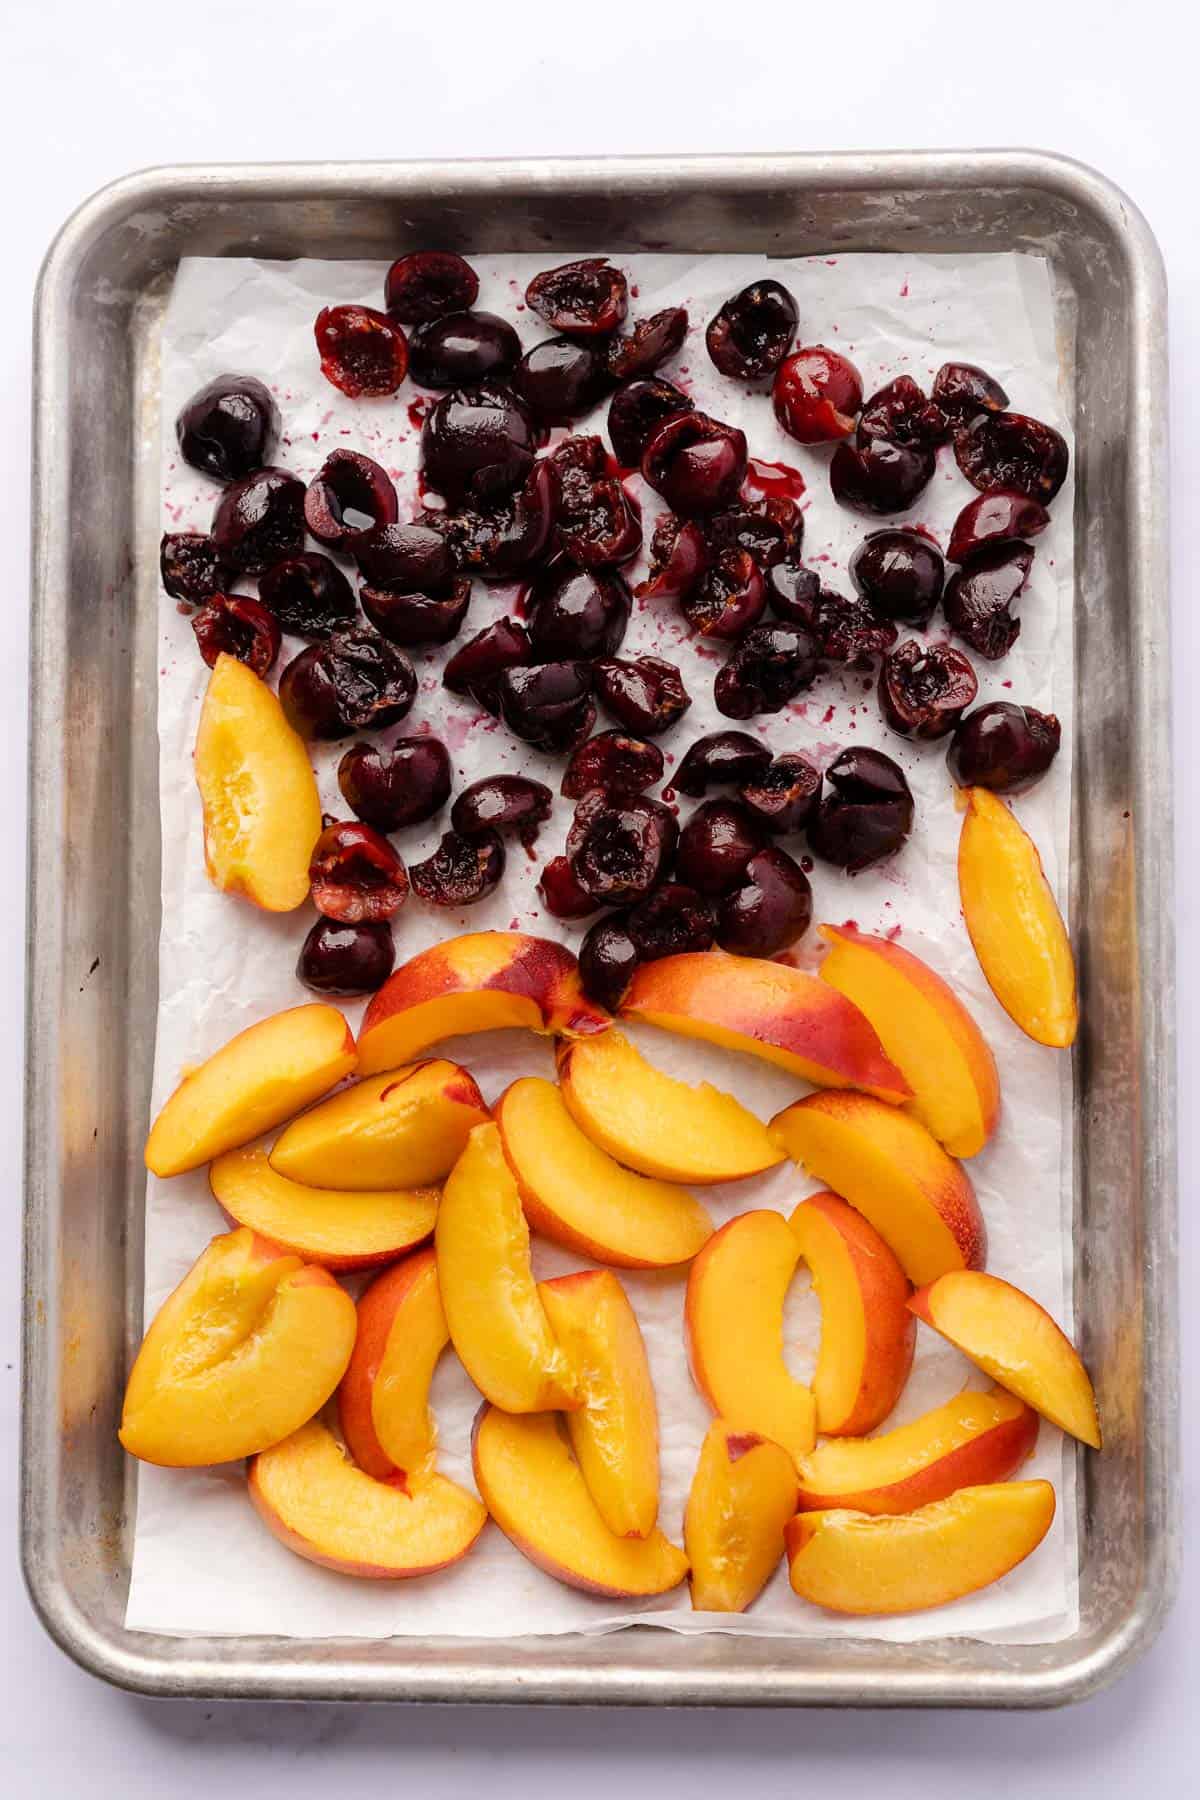 nectarines and cherries on a baking sheet with white parchment paper